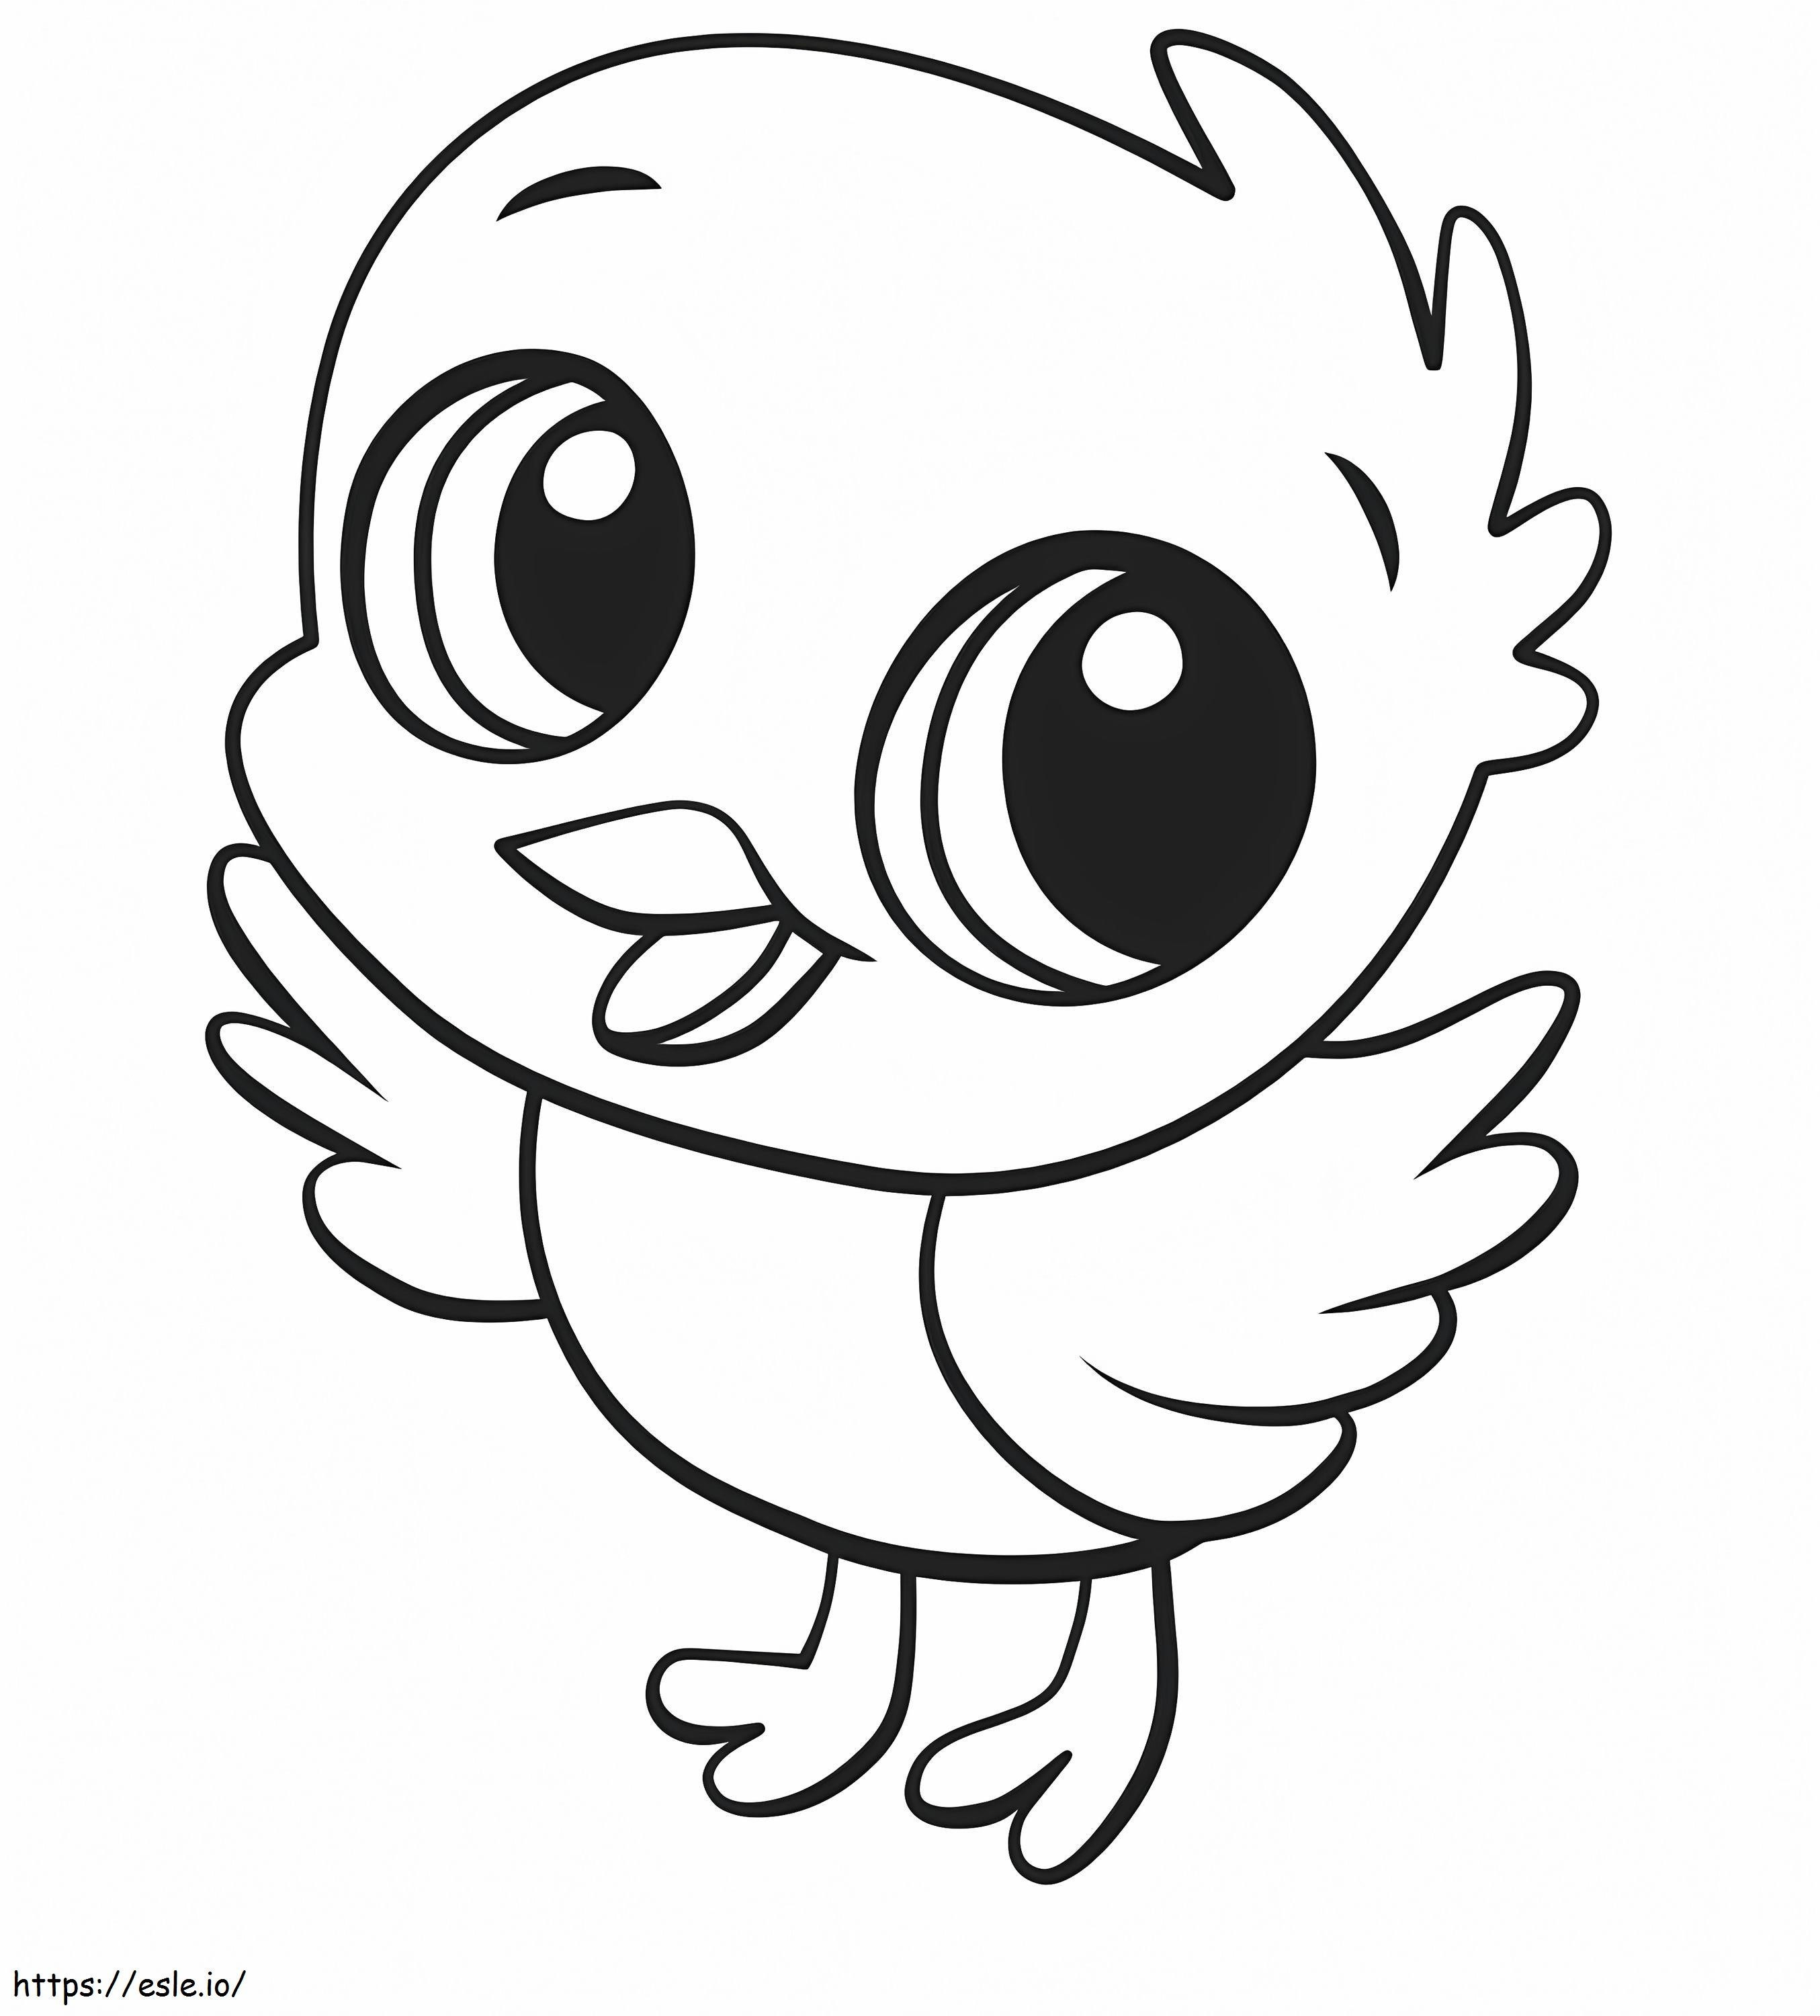 1559983275 Chick coloring page